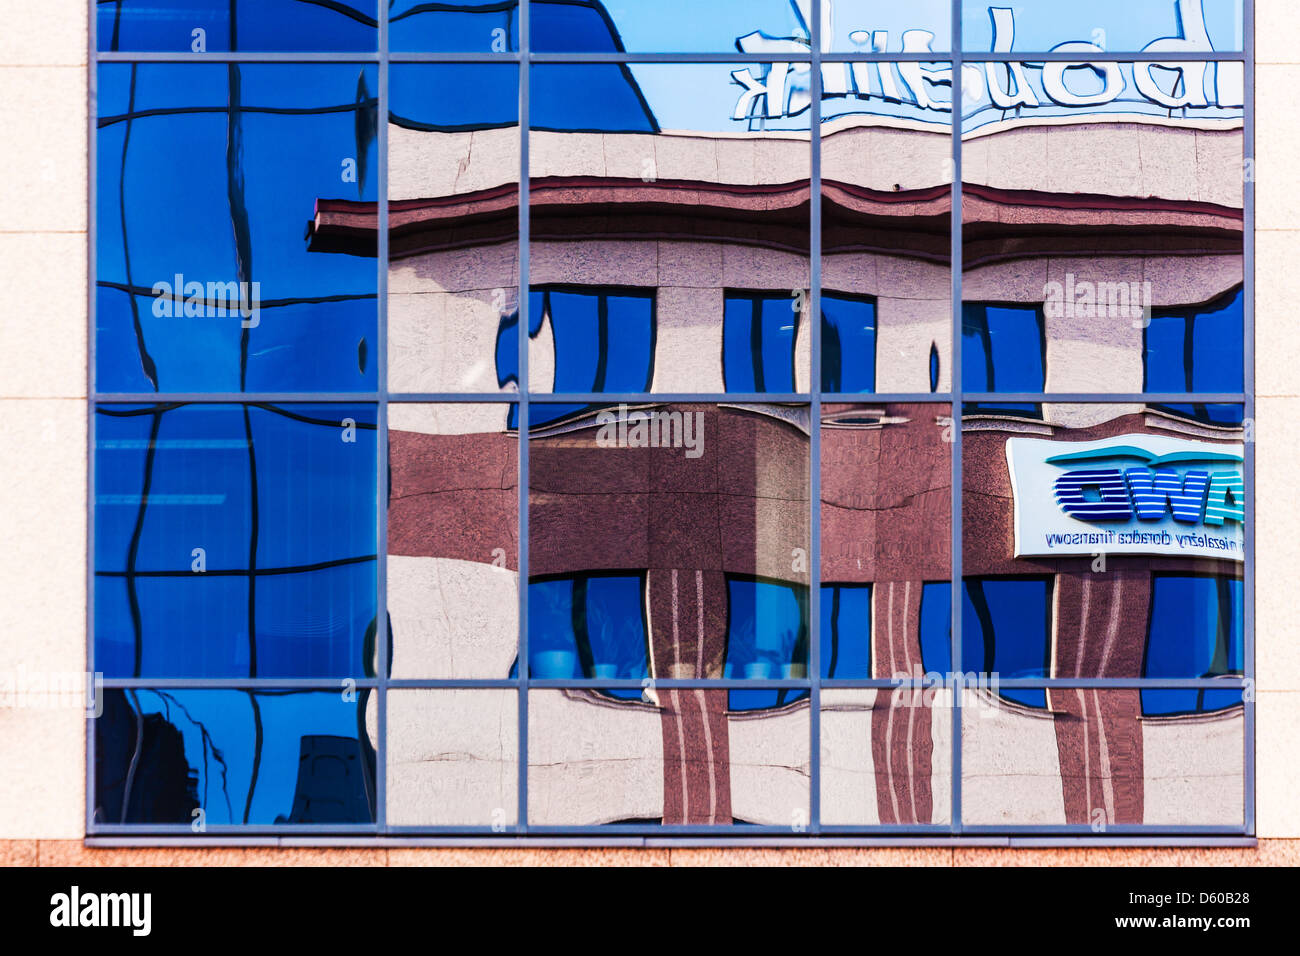 Distorted reflections in a modern glass building in Warsaw, Poland. Stock Photo